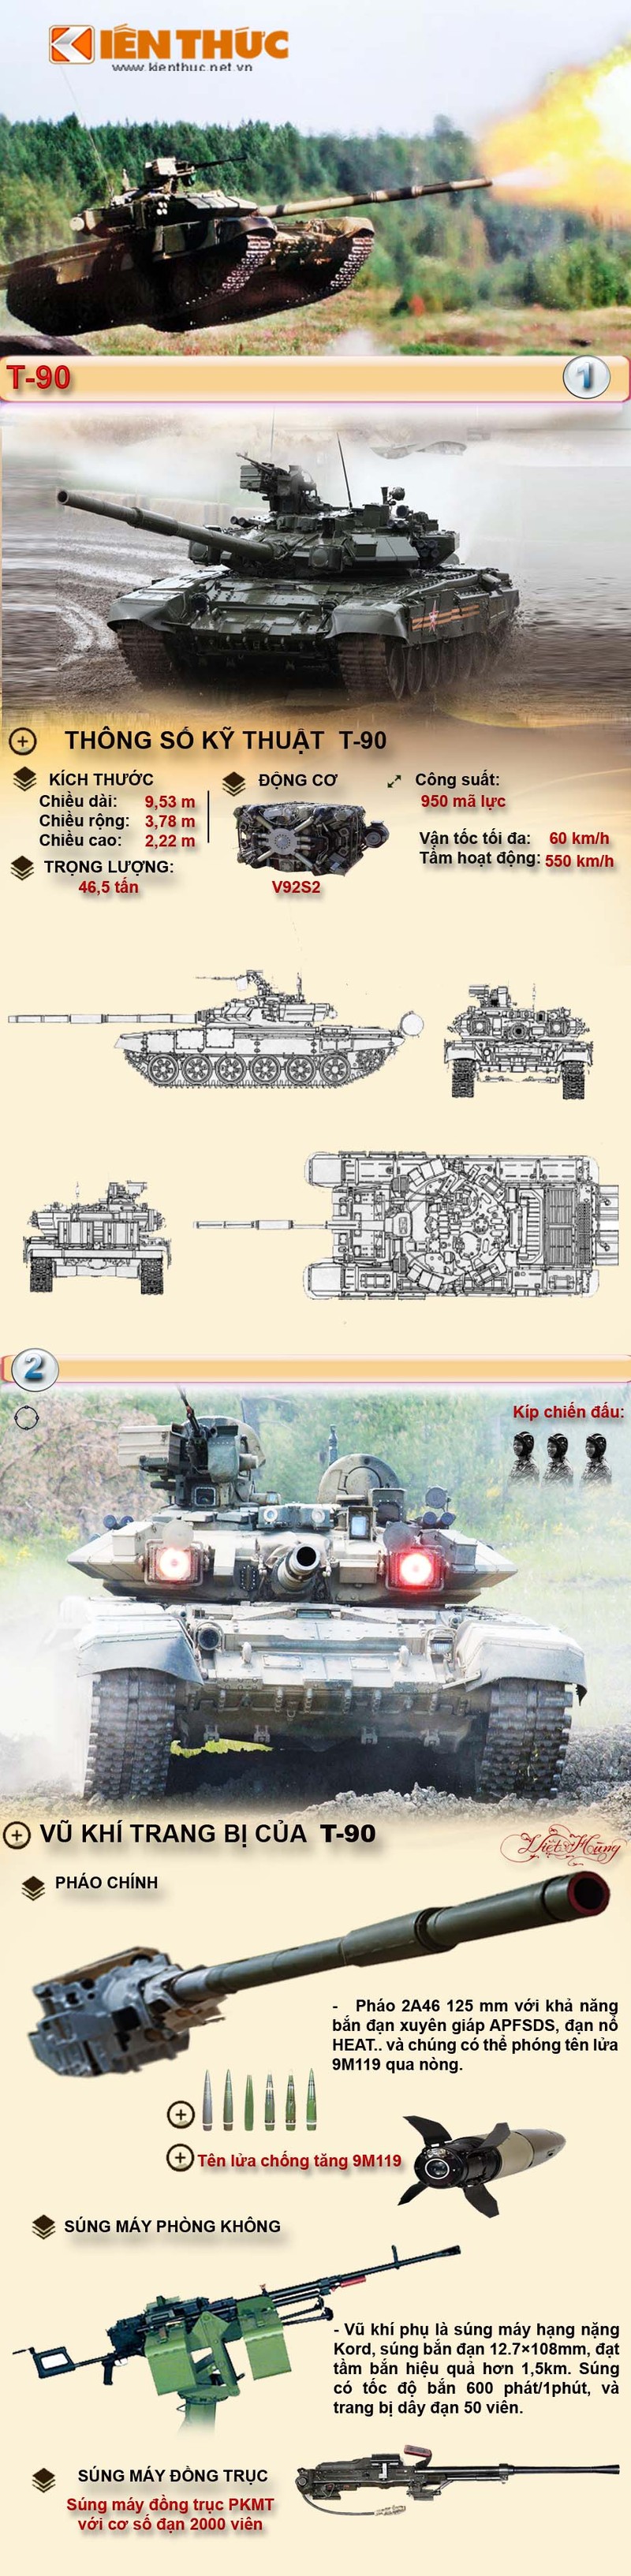 Infographic: Suc manh xe tang T-90 toi tan bac nhat the gioi